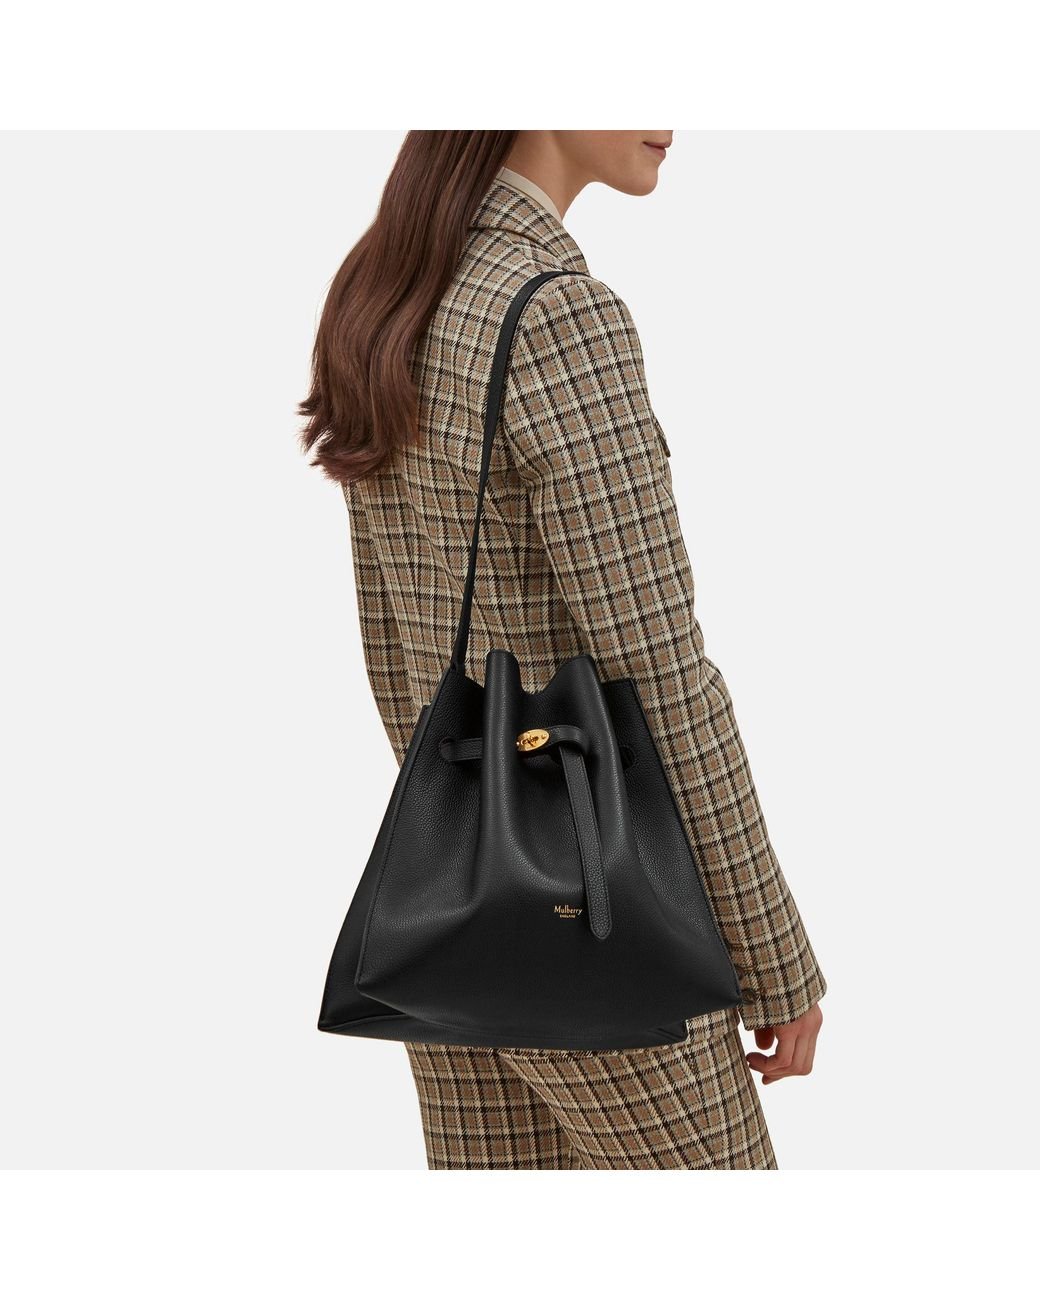 Mulberry Small Tyndale in Black | Lyst